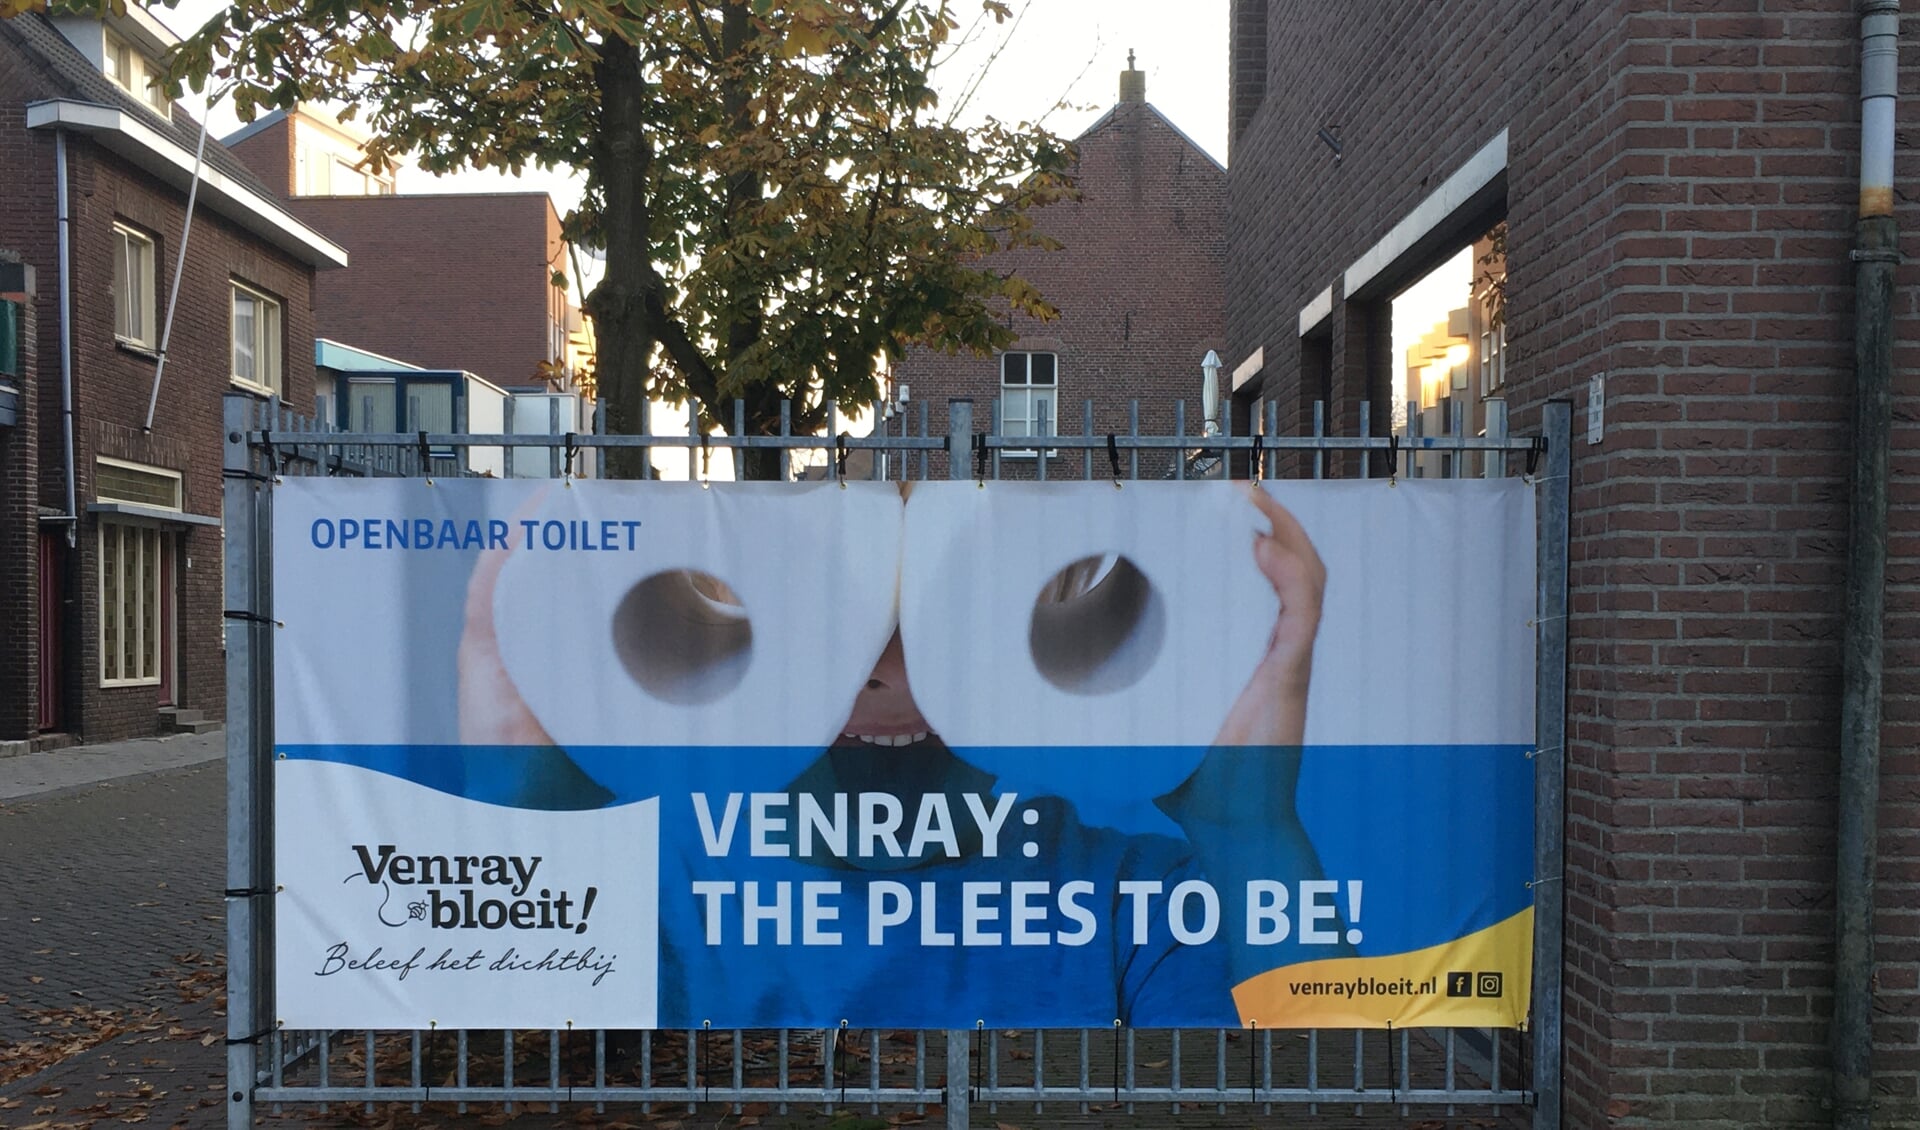 Toiletwagen: the plees to be!